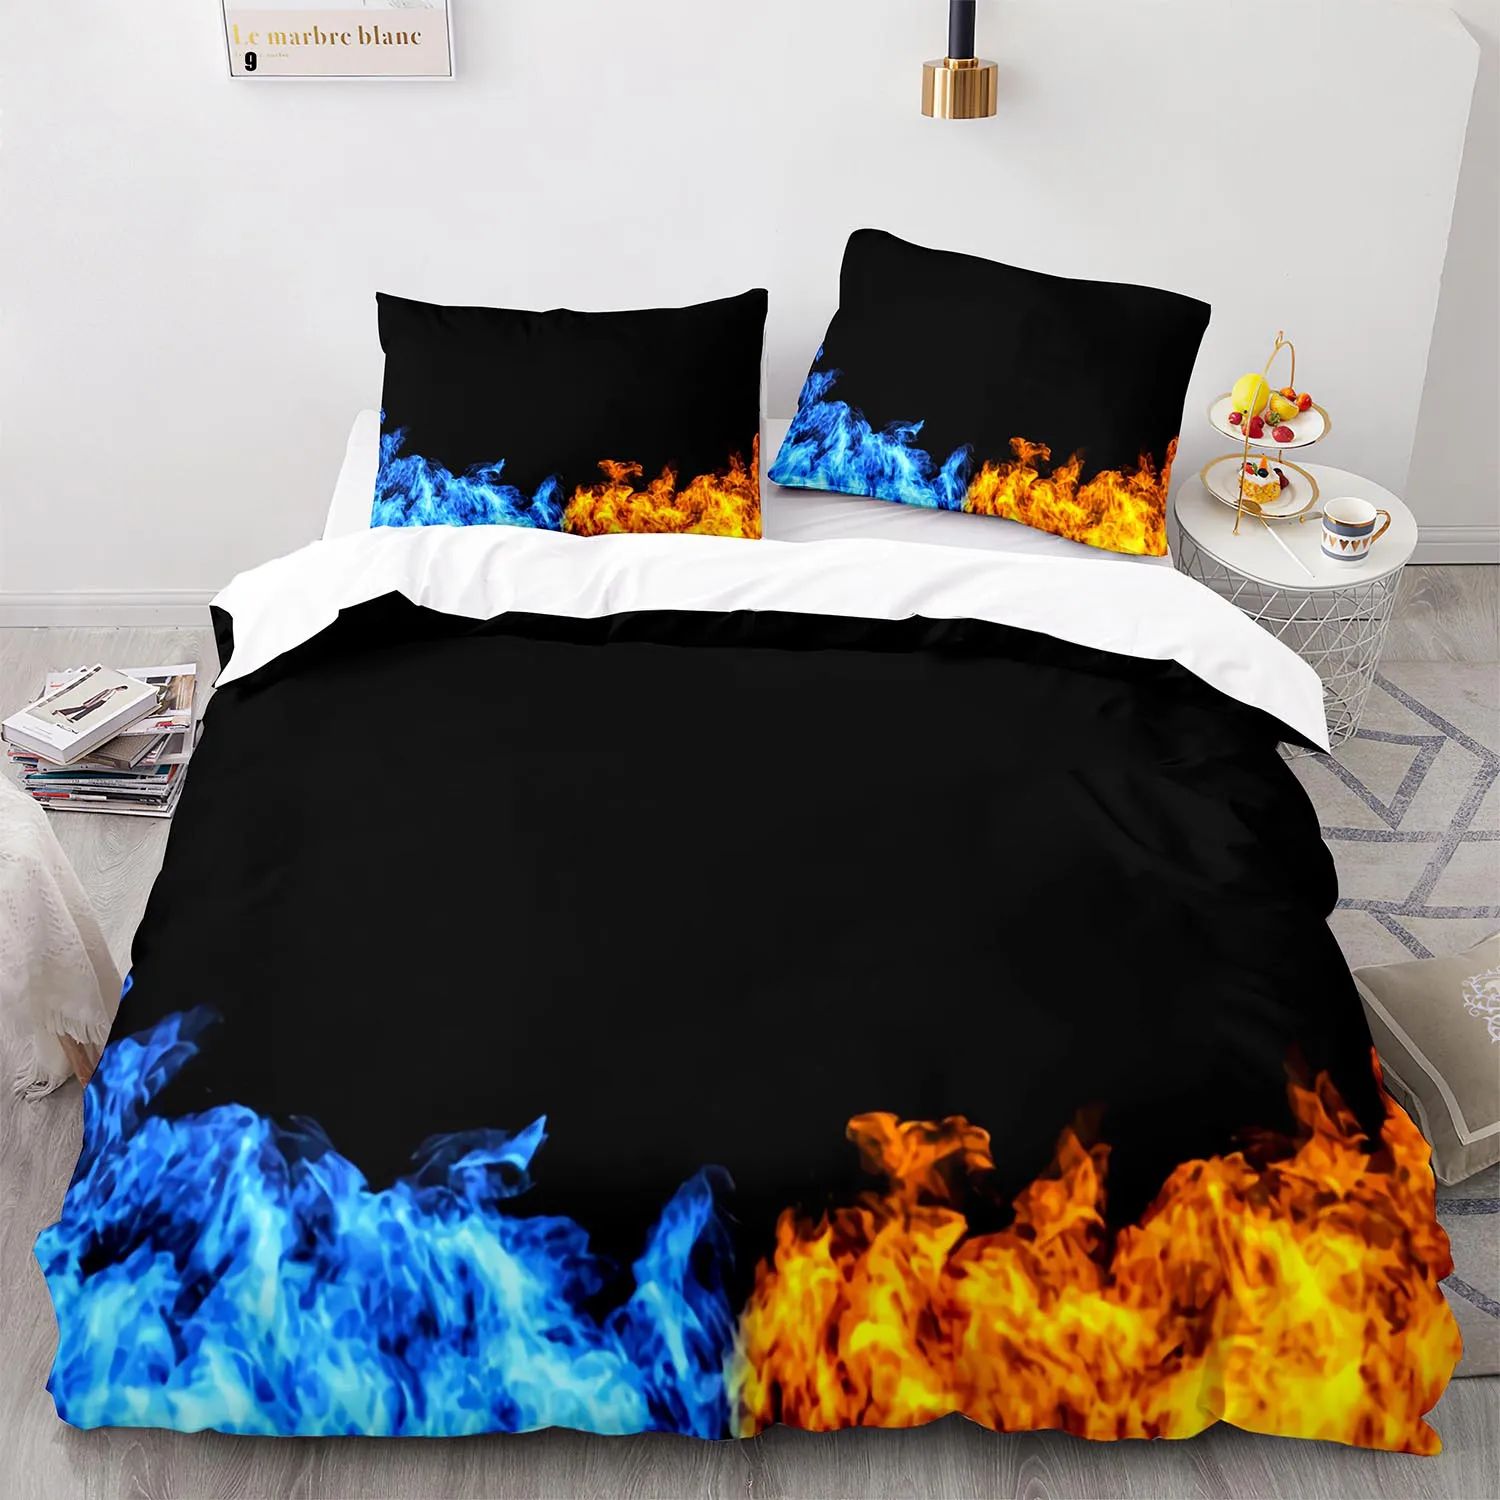 

Colorful Flame Bedding Set Single Twin Full Queen King Size Ice And Fire Blaze Bed Set Children Kid Bedroom Duvetcover Sets 021